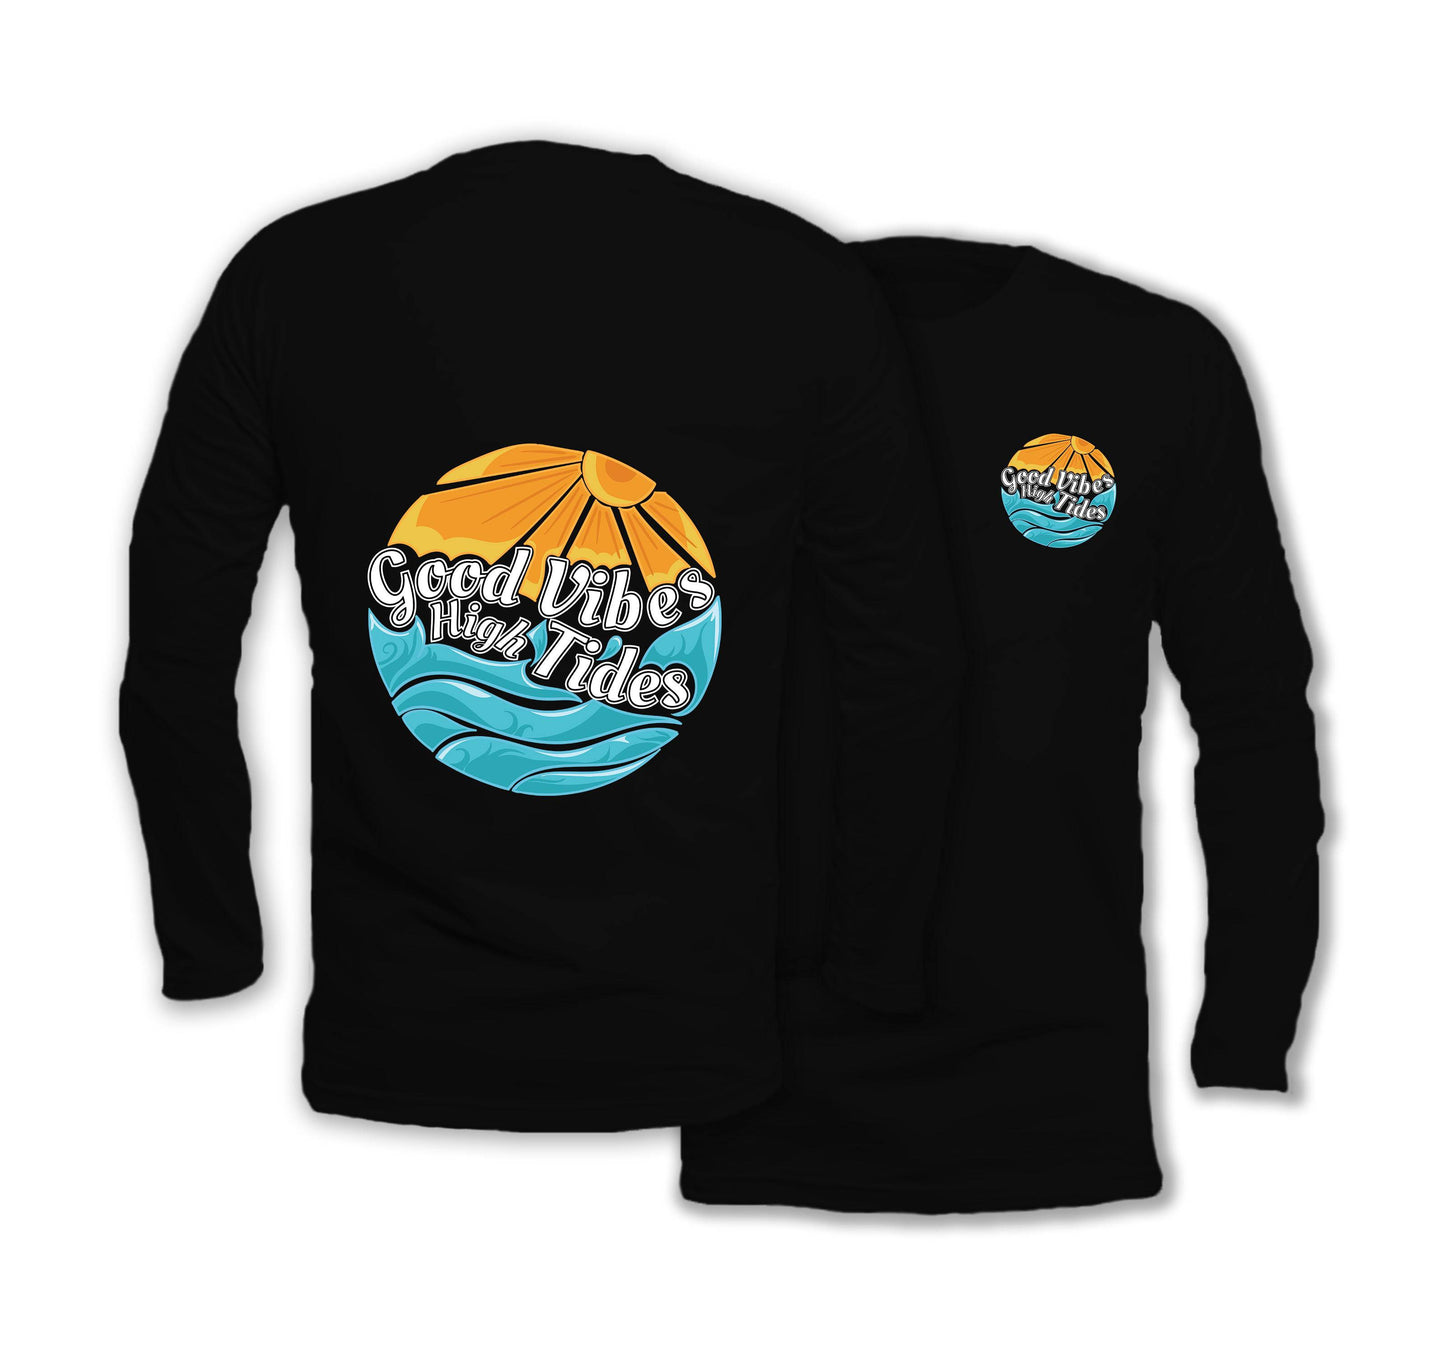 Good Vibes With High Tides - Long Sleeve Organic Cotton T-Shirt - One Choice Apparel